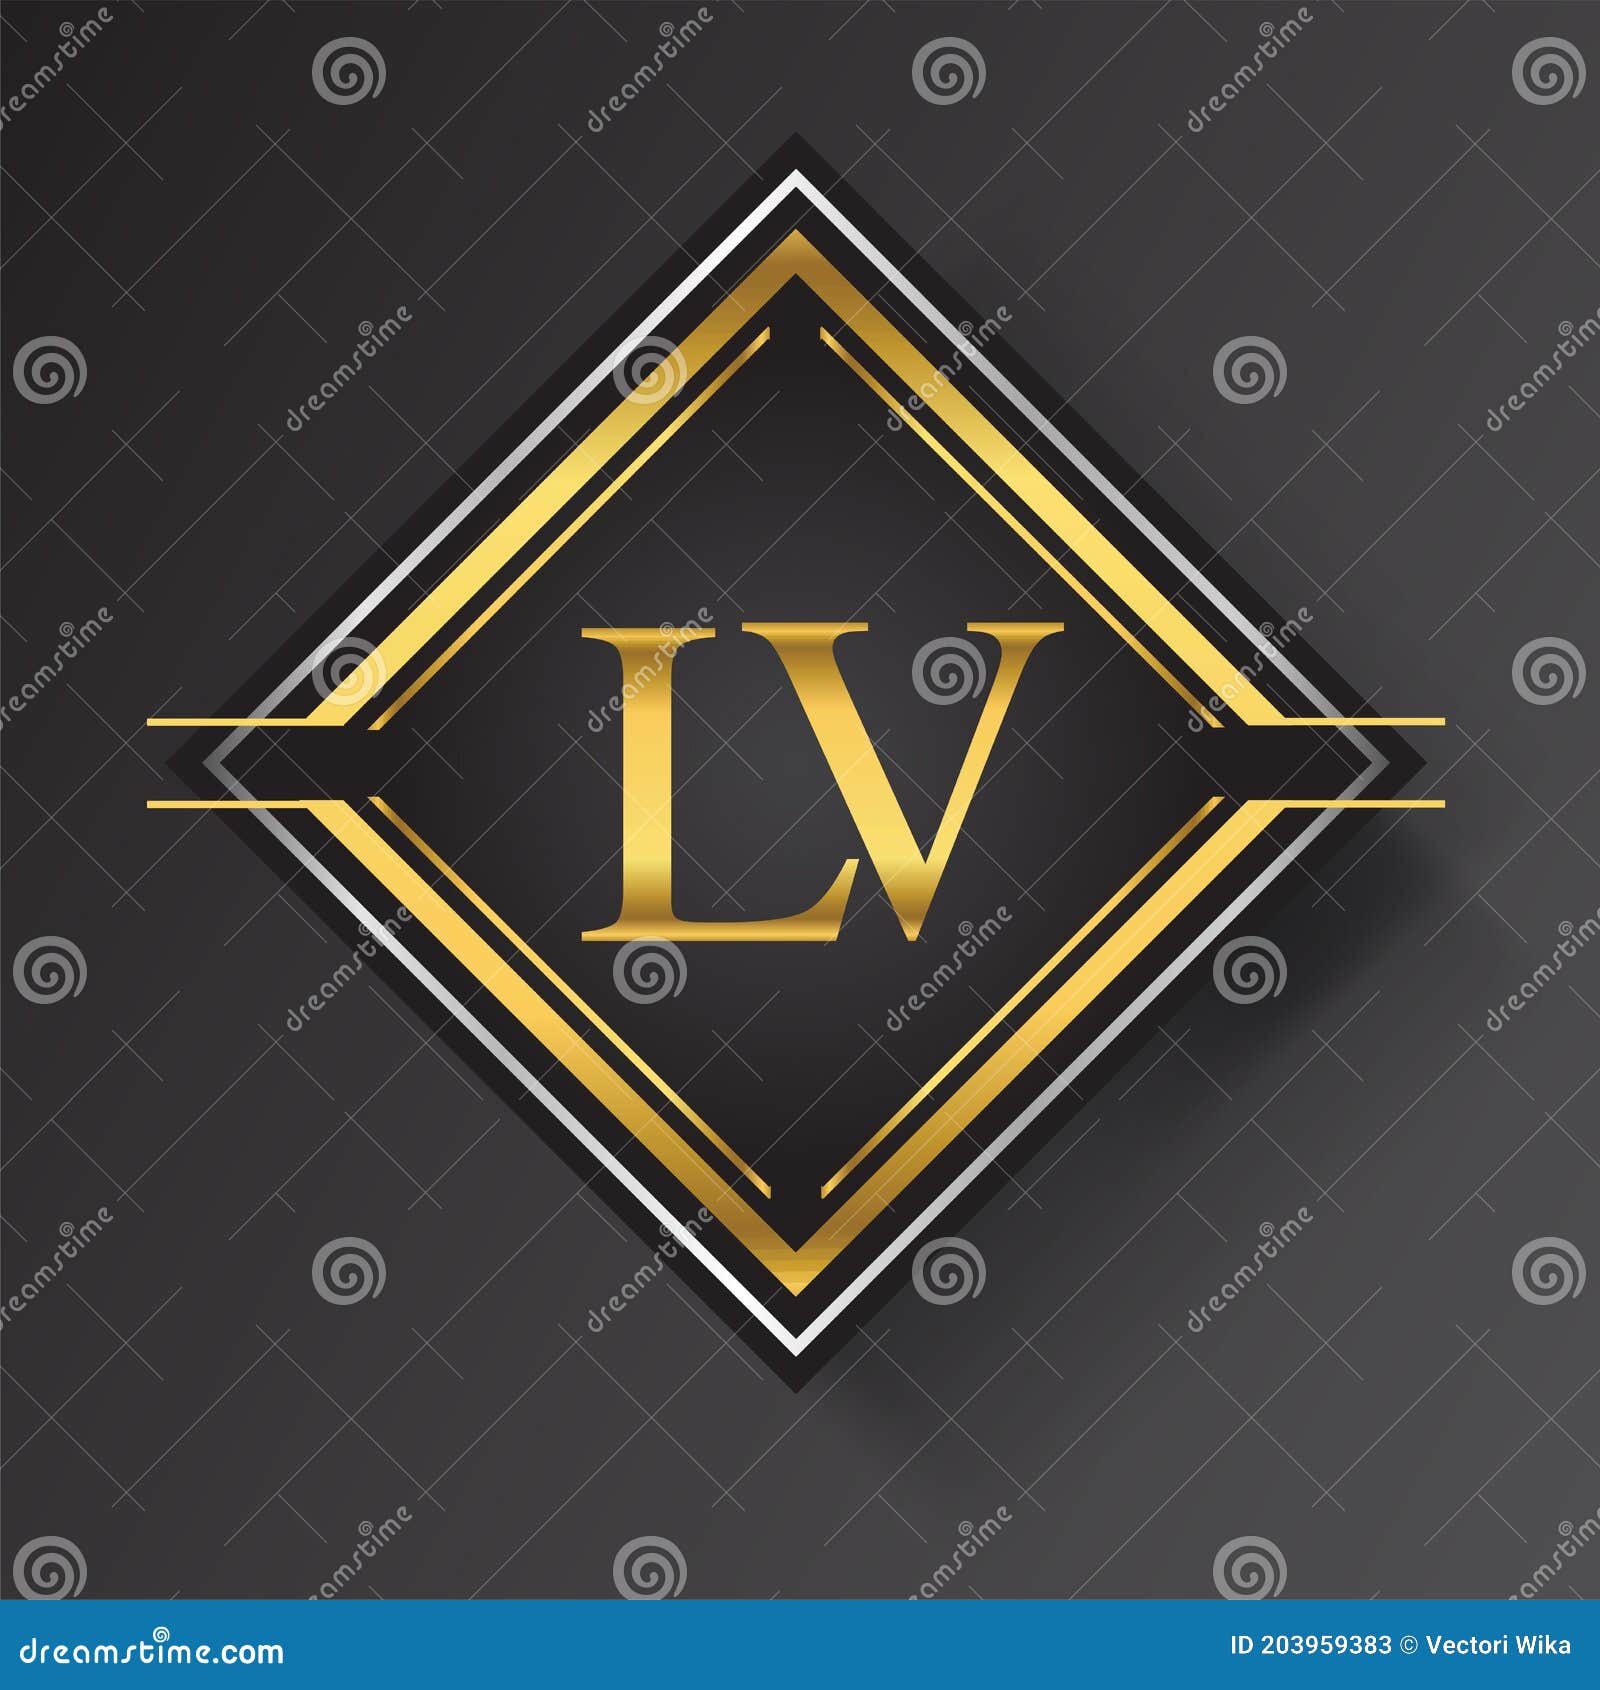 Lv l v black and yellow letter logo with swoosh Vector Image